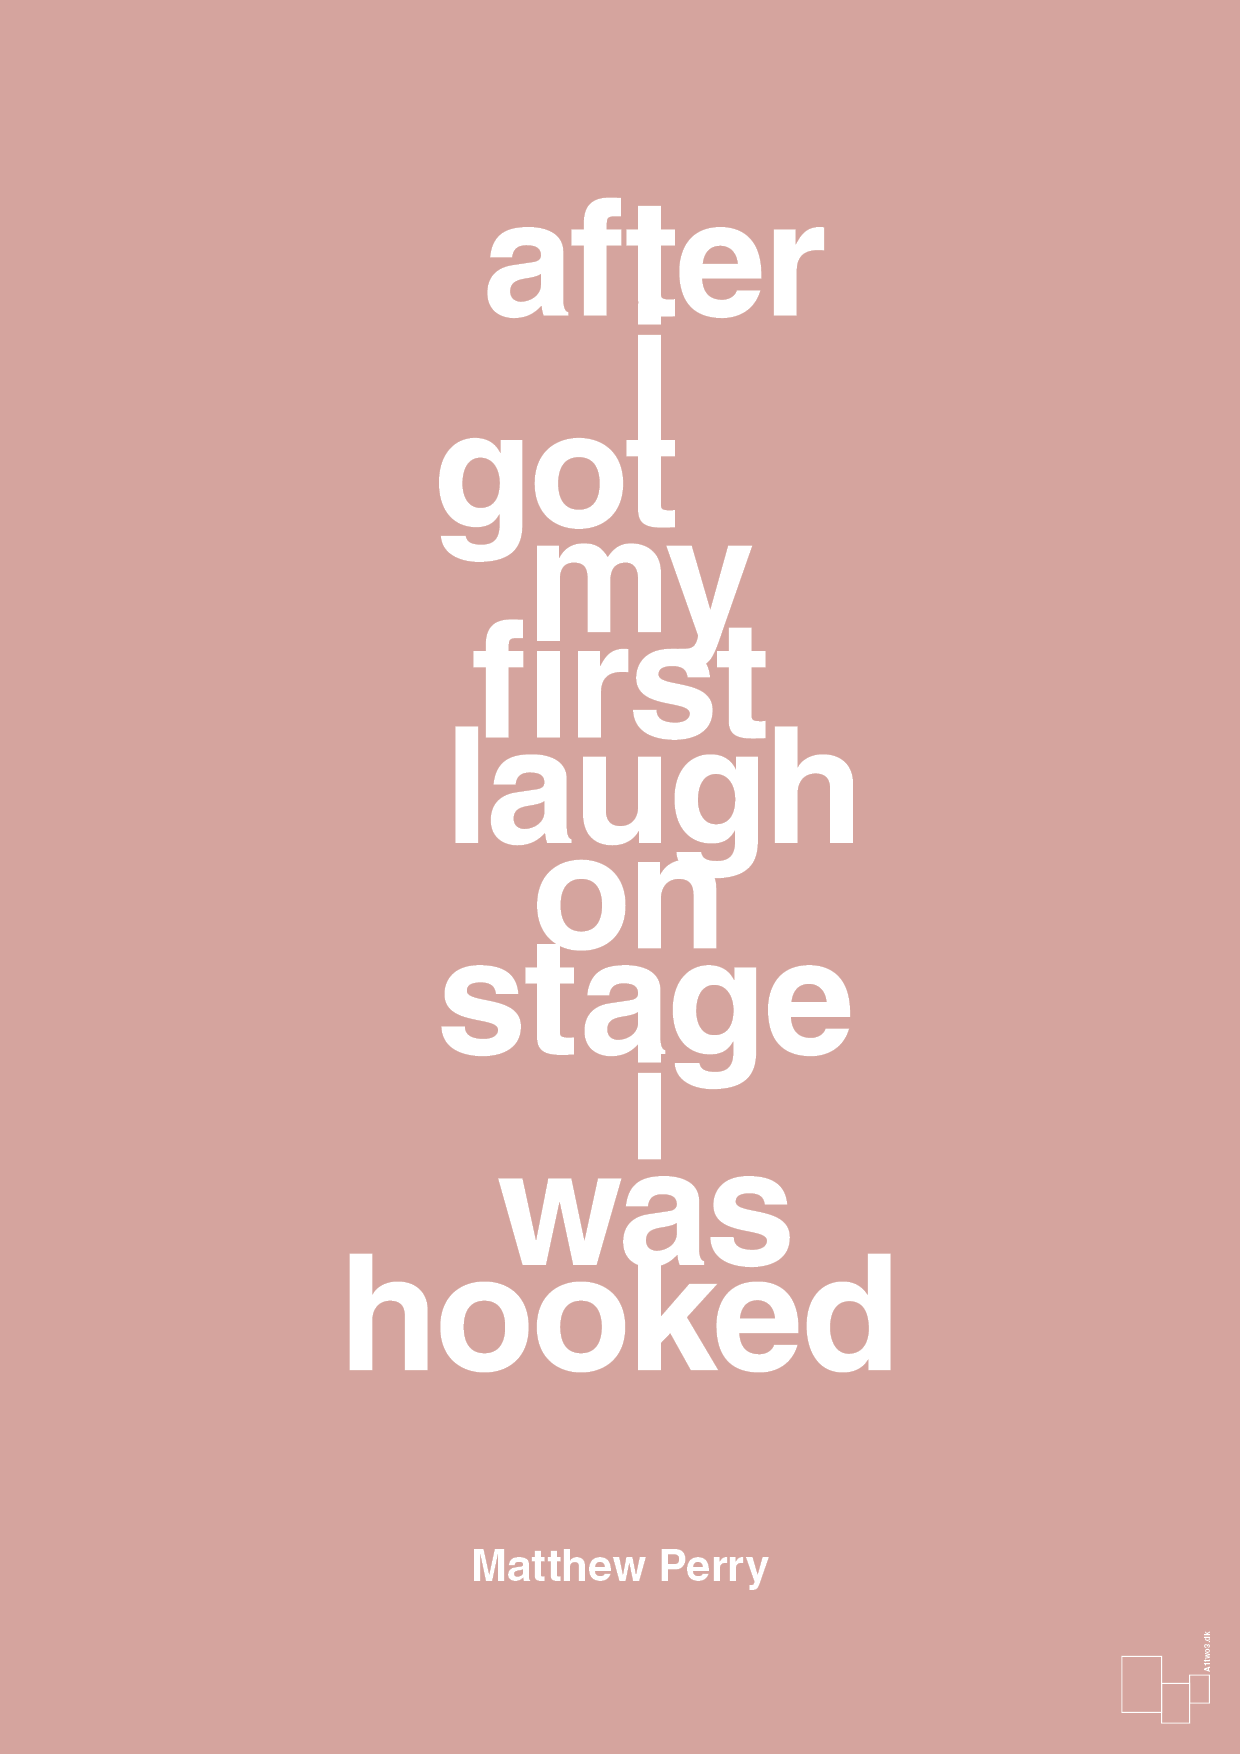 after i got my first laugh on stage i was hooked - Plakat med Citater i Bubble Shell